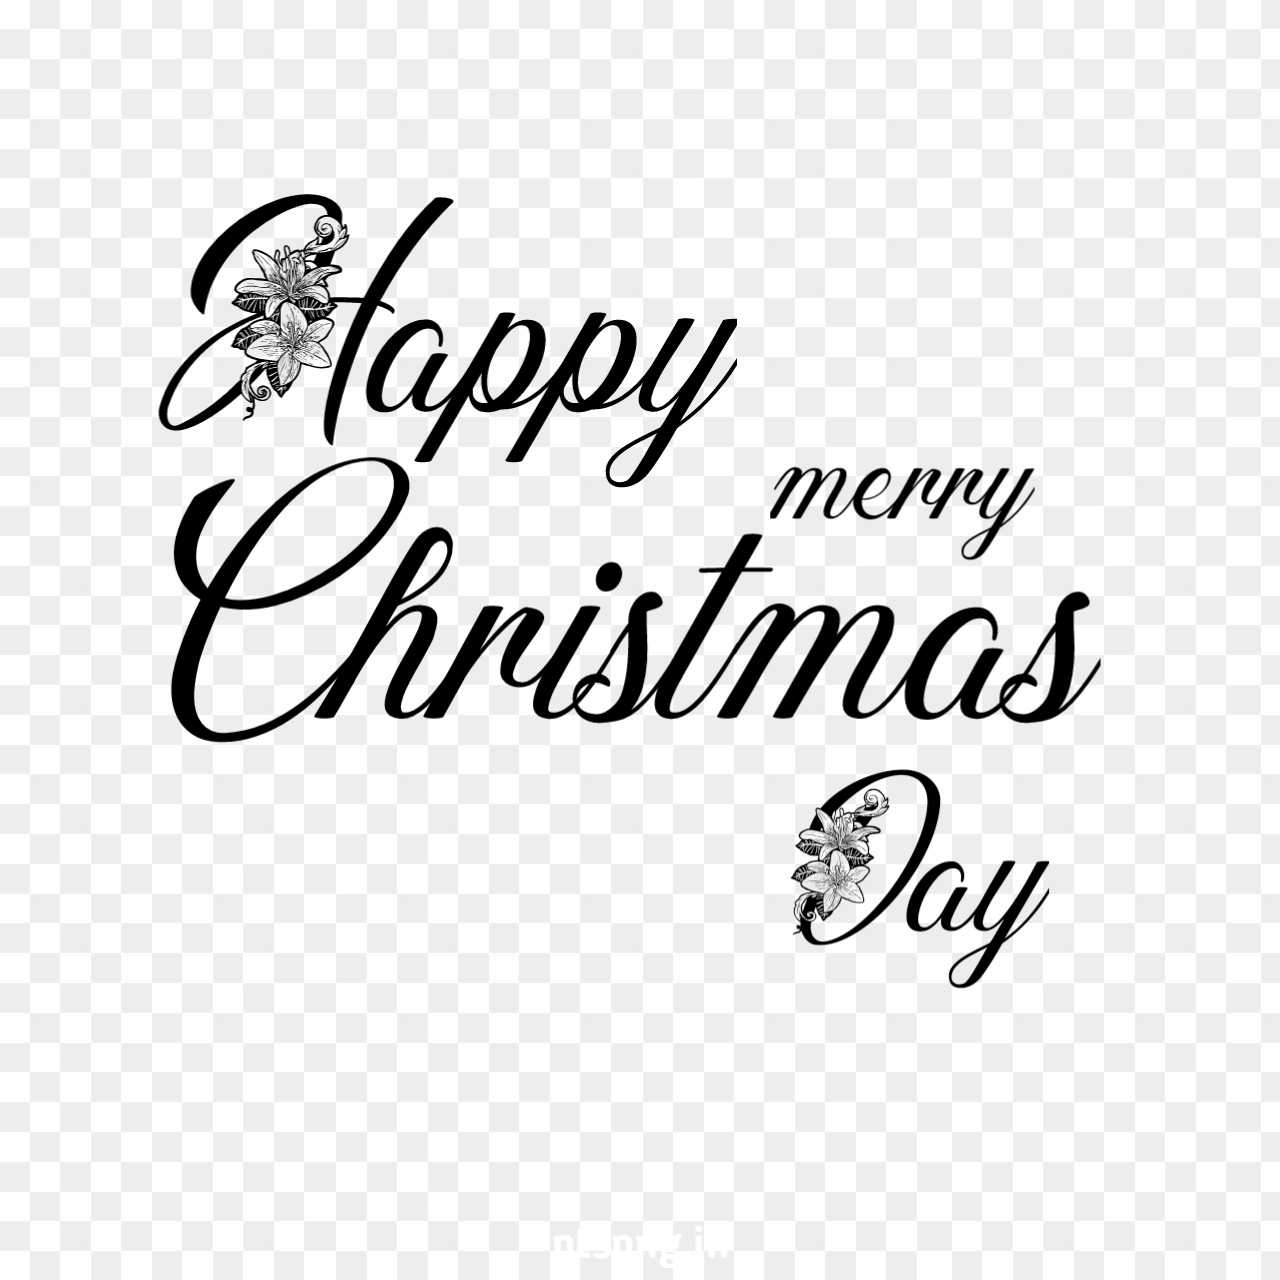 Happy Merry christmas day png images 